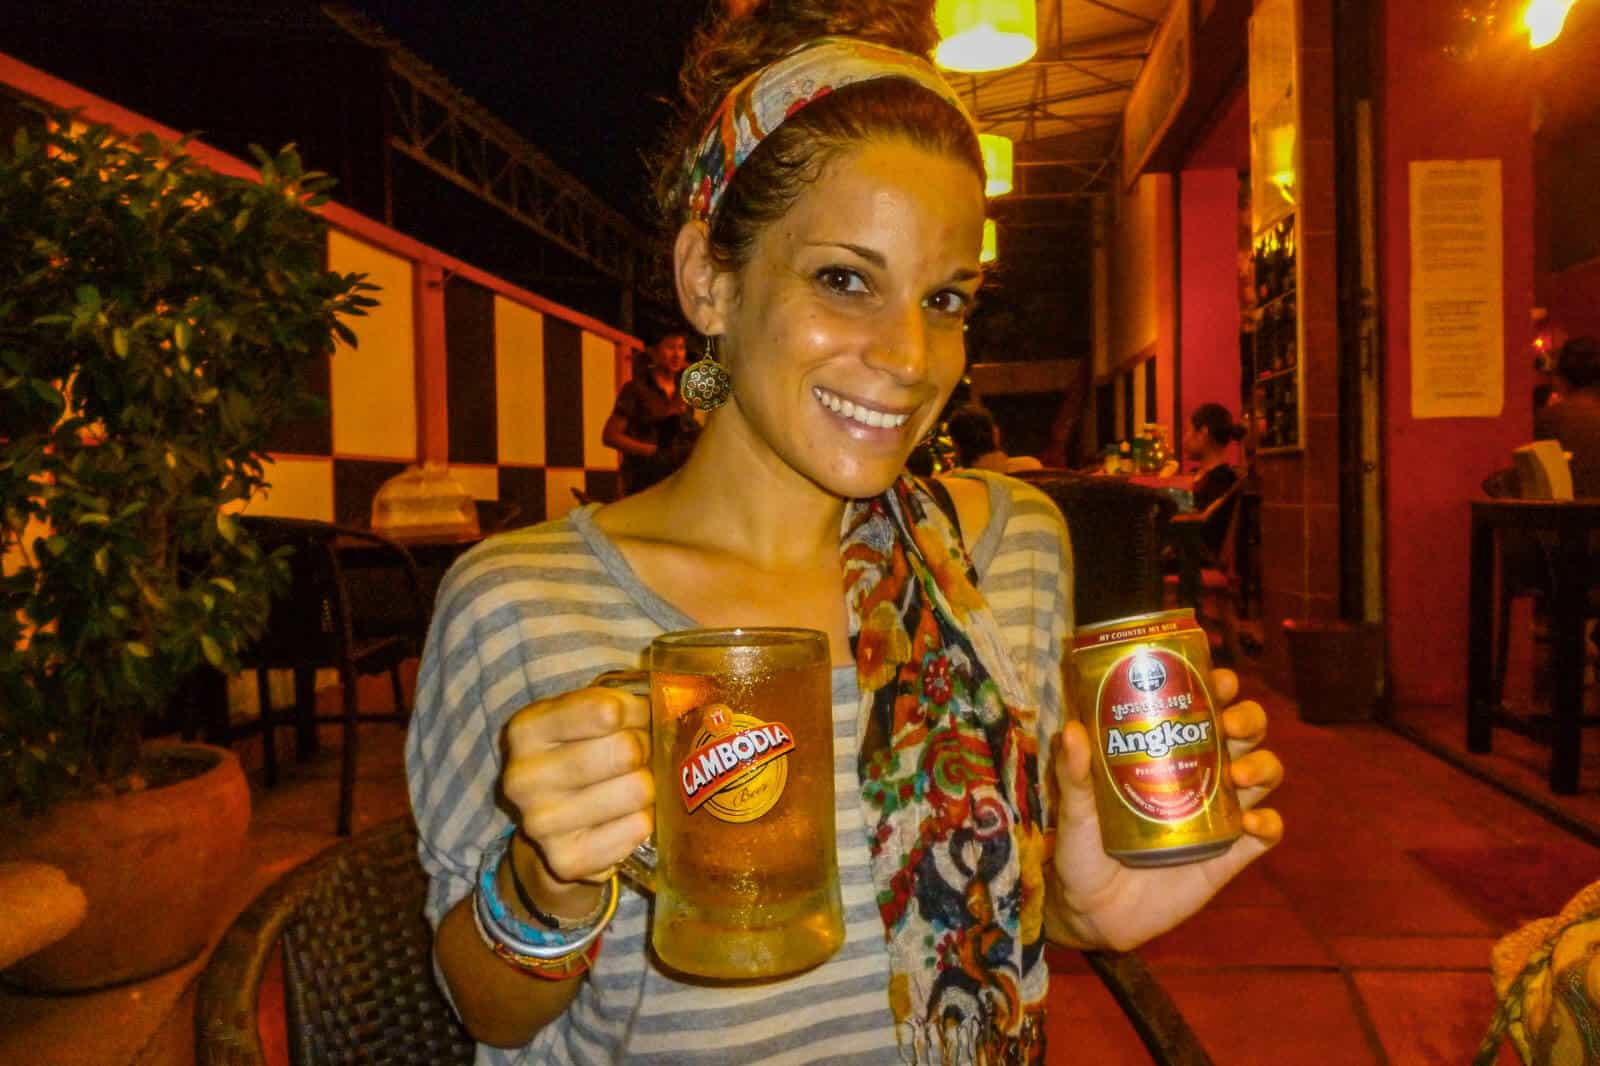 Nina in Cambodia while backpacking through Southeast Asia holding beer.